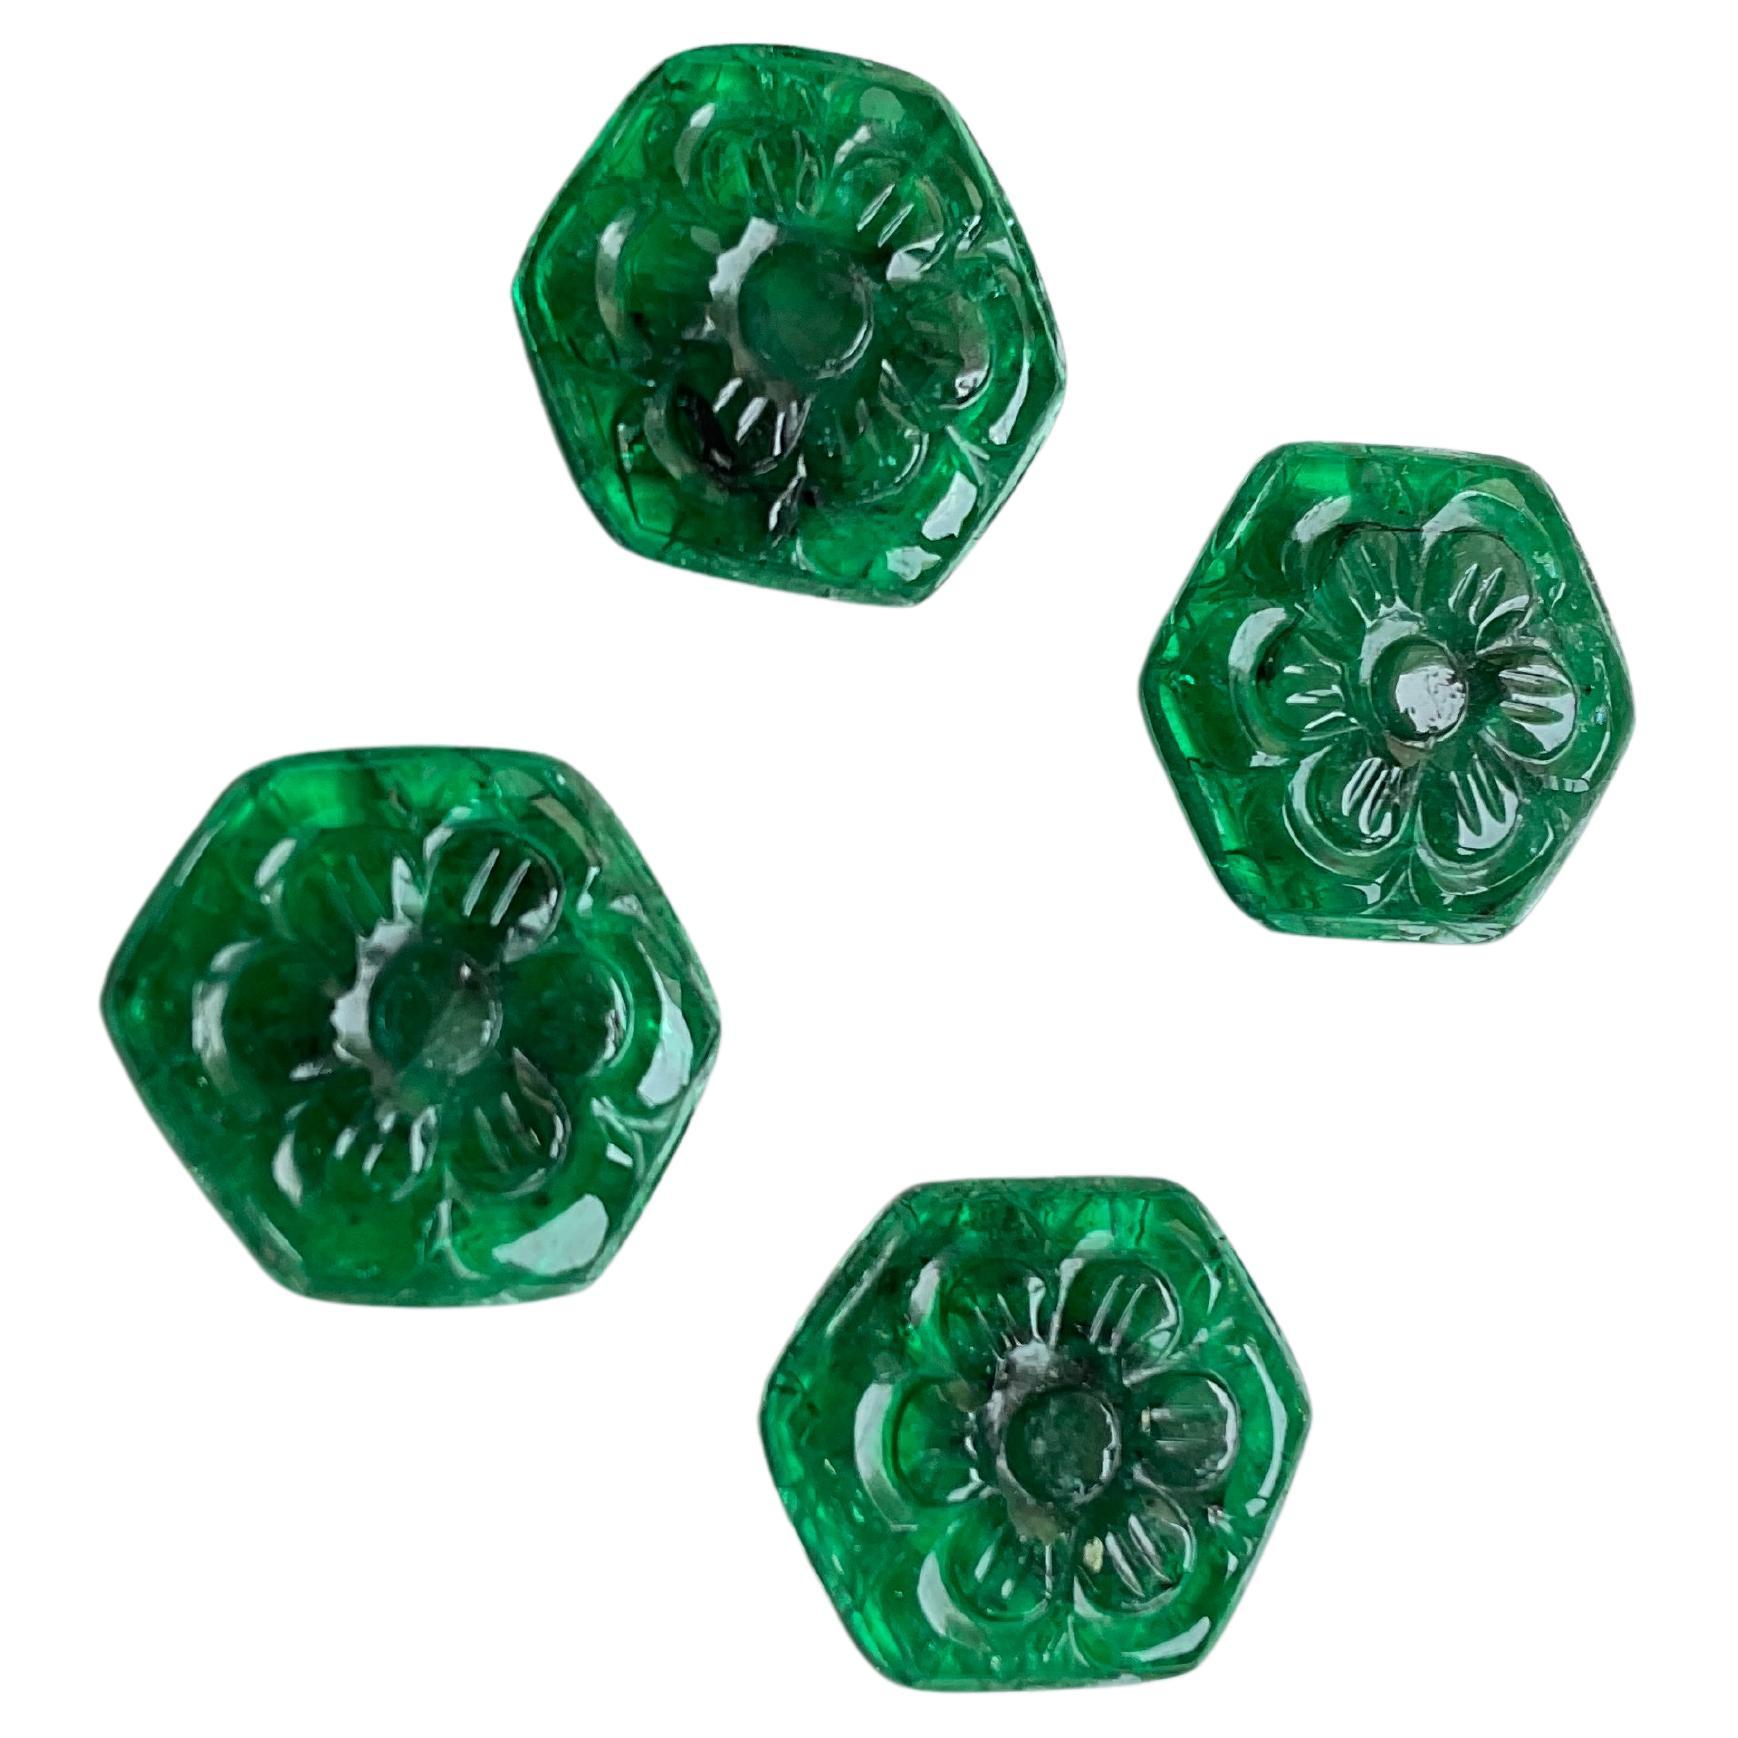 Zambian Emerald Hexagon Carved Fancy Cabochon Loose Gemstone for Jewelry